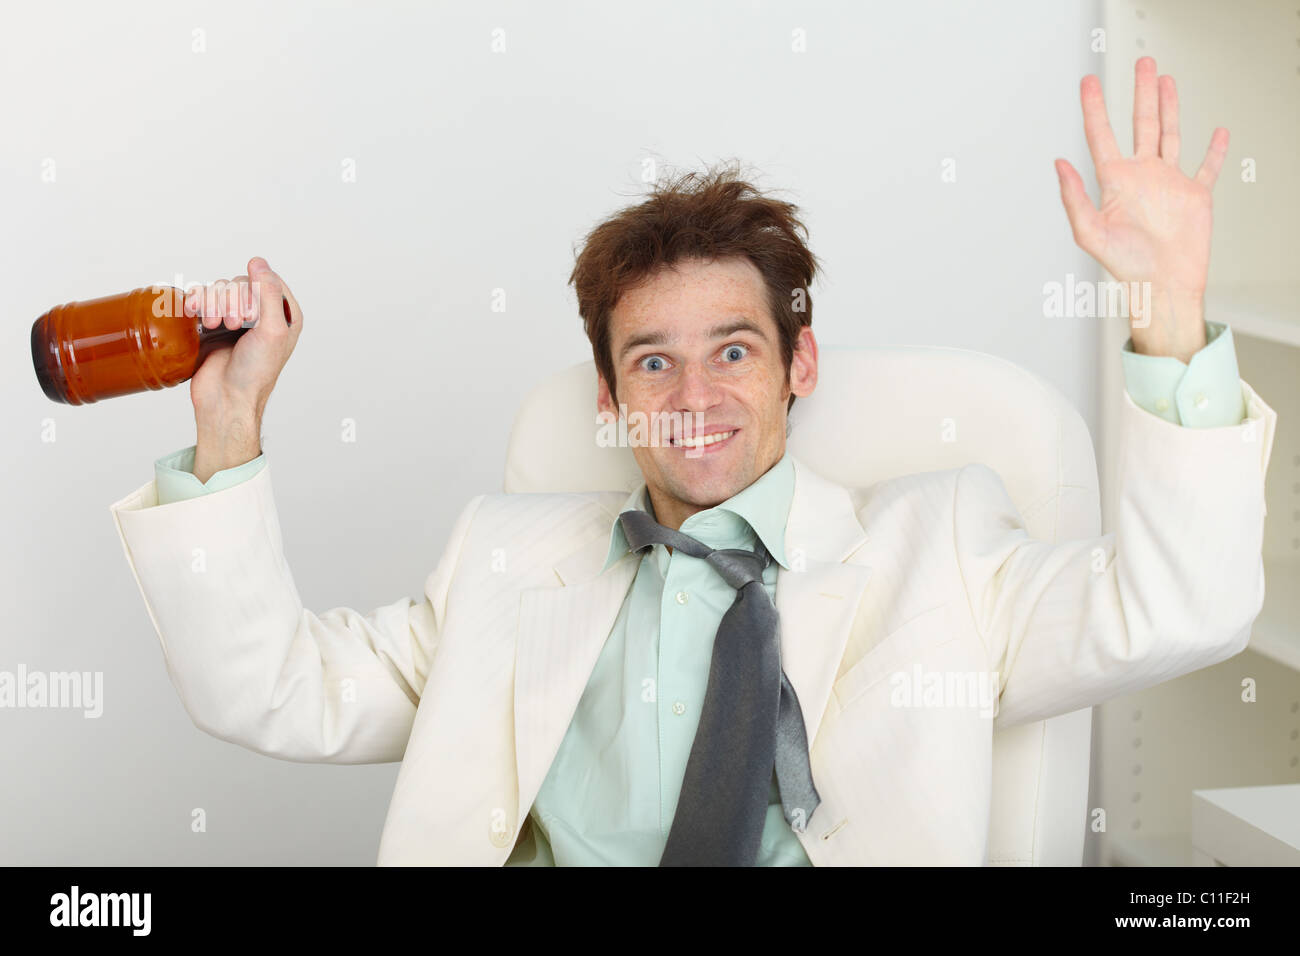 Beer has come to an end but is all same cheerful Stock Photo